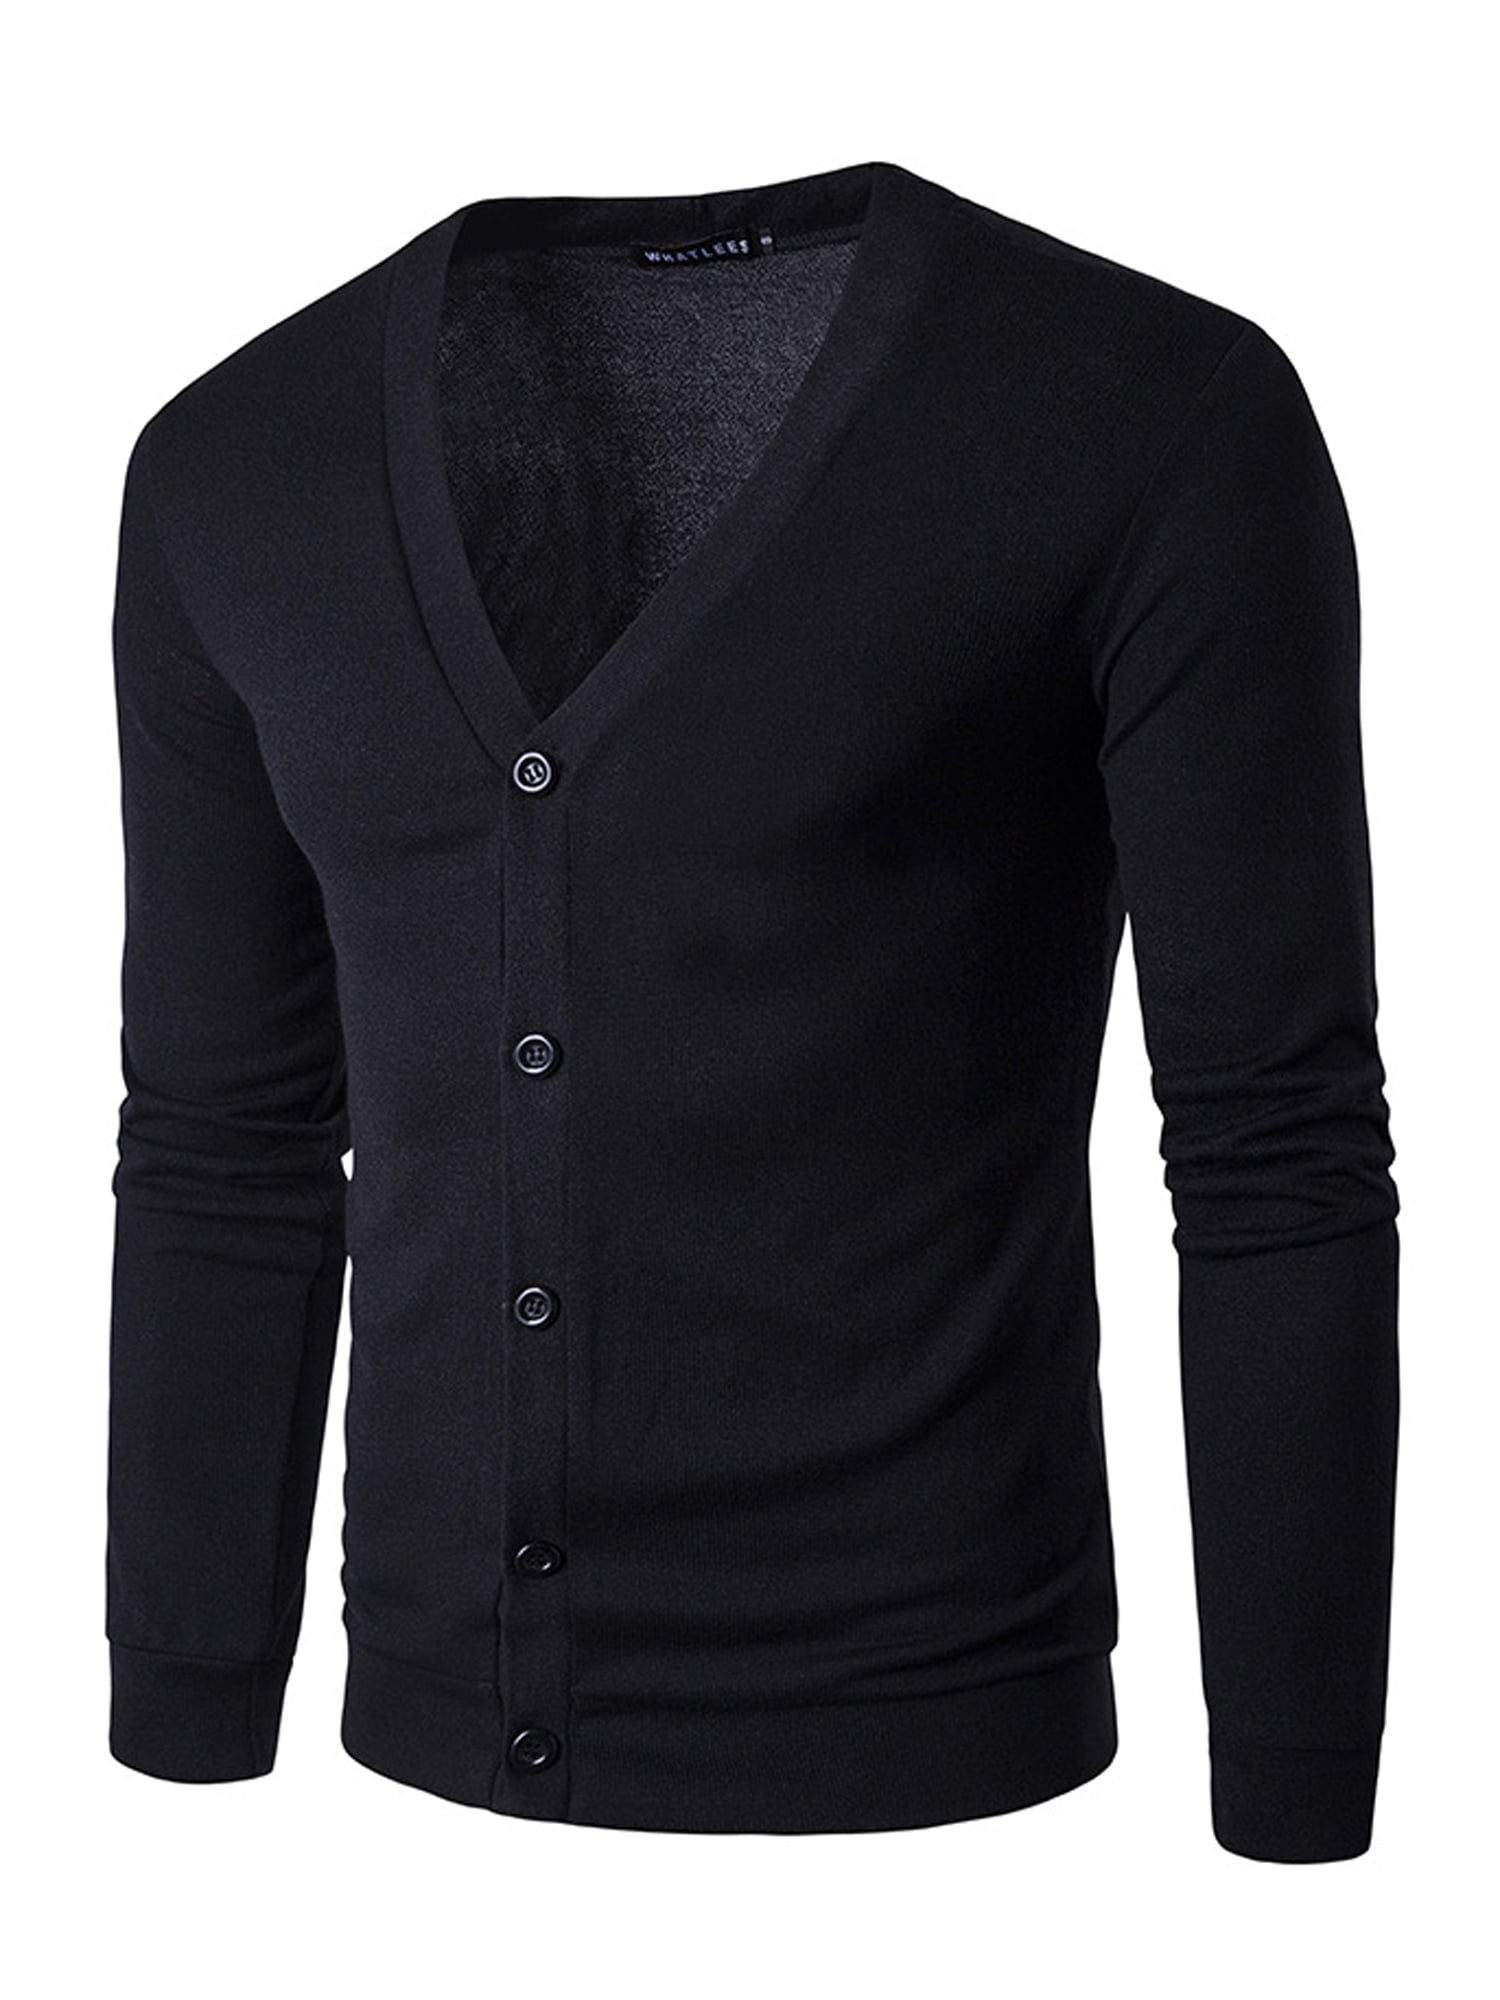 GRMO Men Button Front V-Neck Long Sleeve Solid Knitted Cardigan Coat